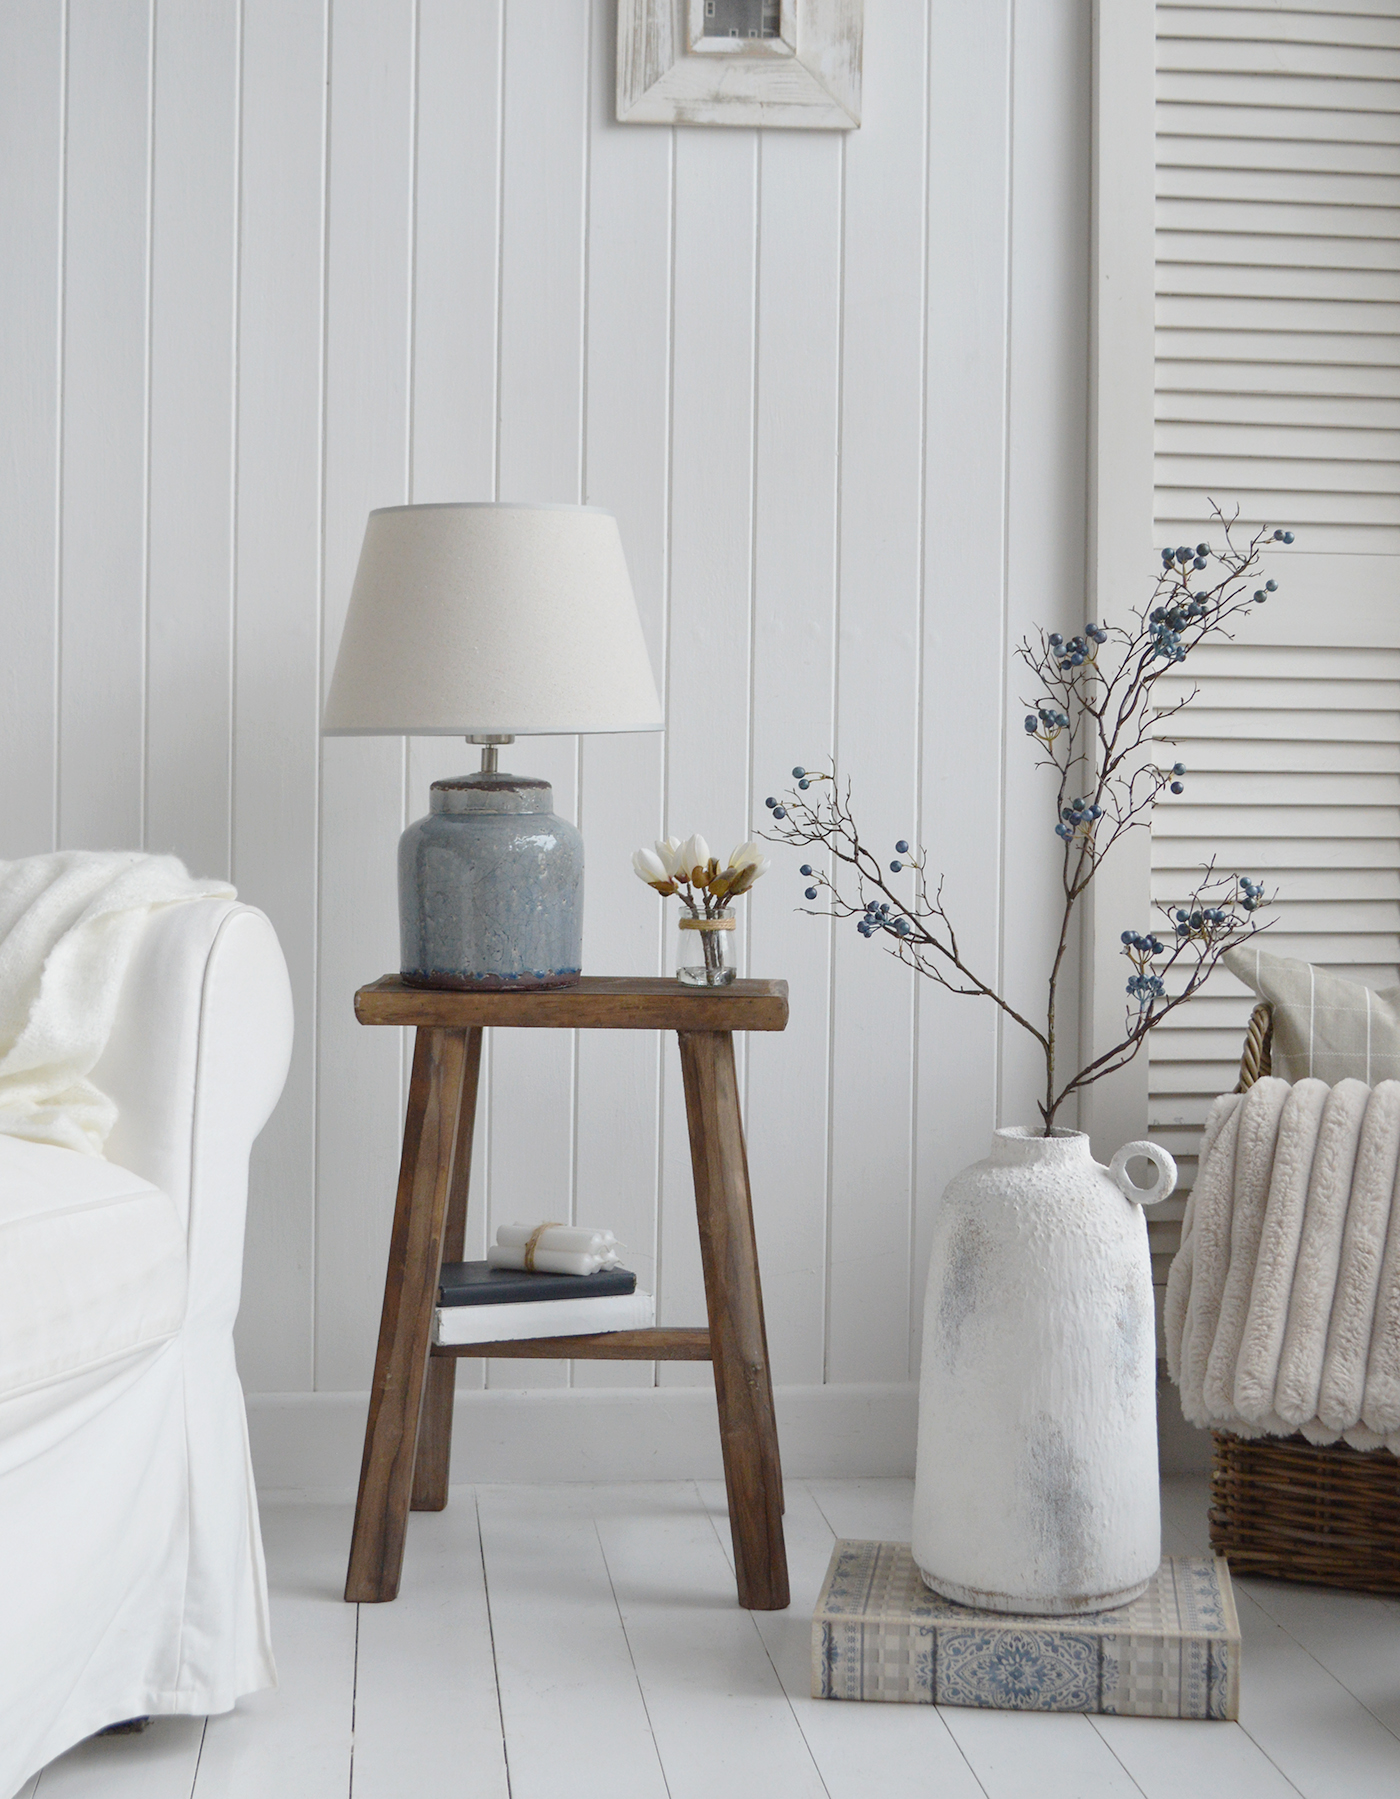 The Georgetown wooden stool - an ideal lamp table for a New England beach house coastal home